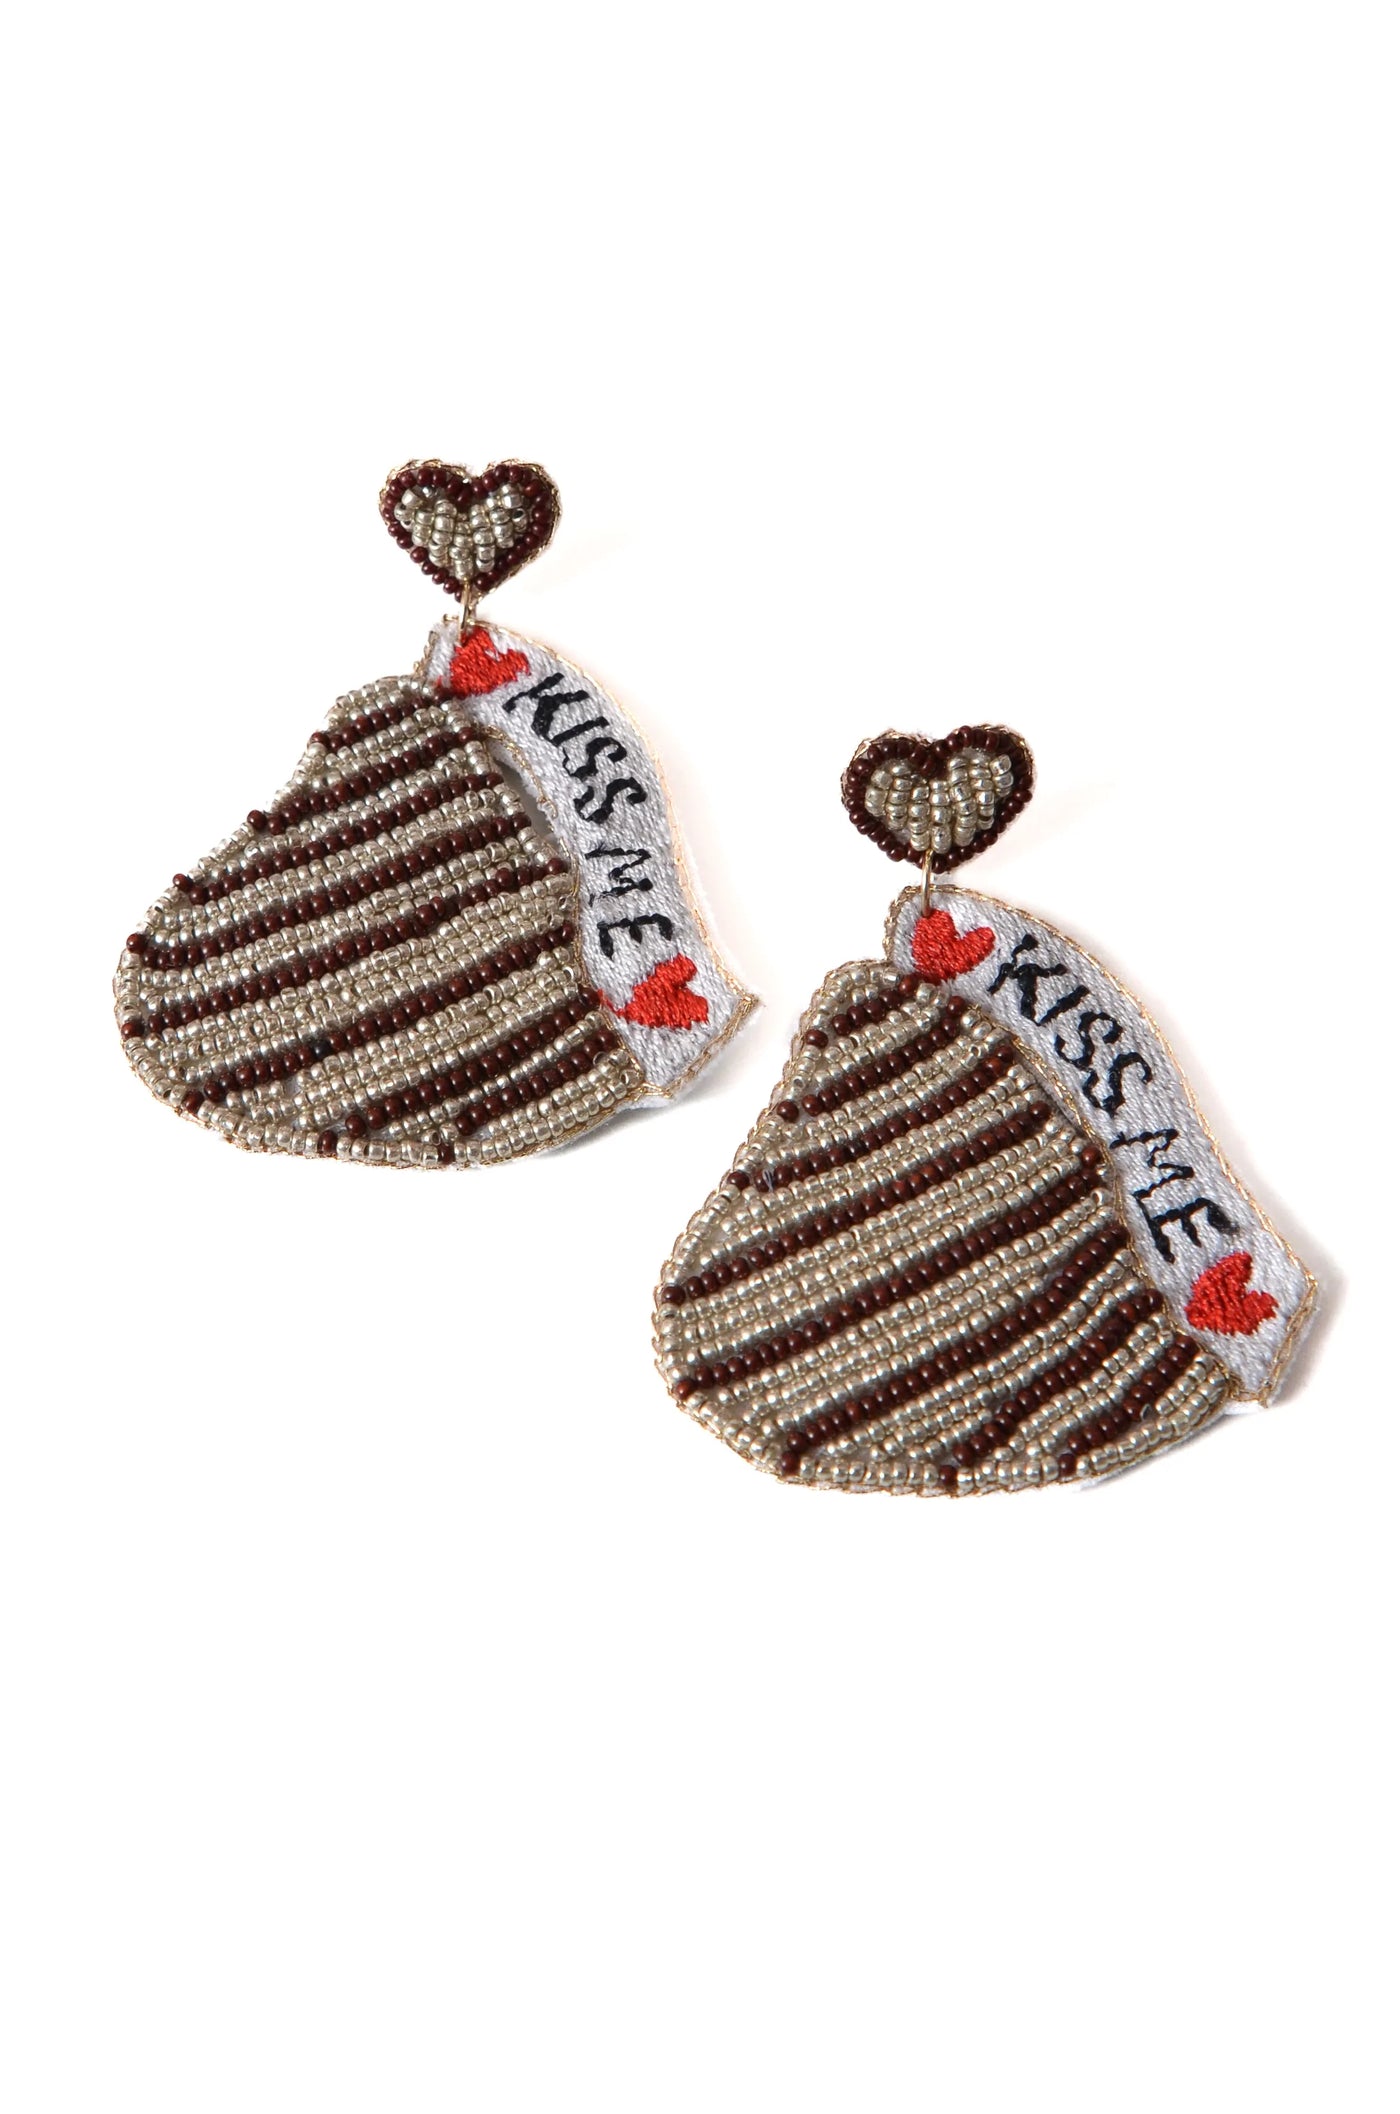 Kiss me chocolate earrings with brown and silver stripes front view.